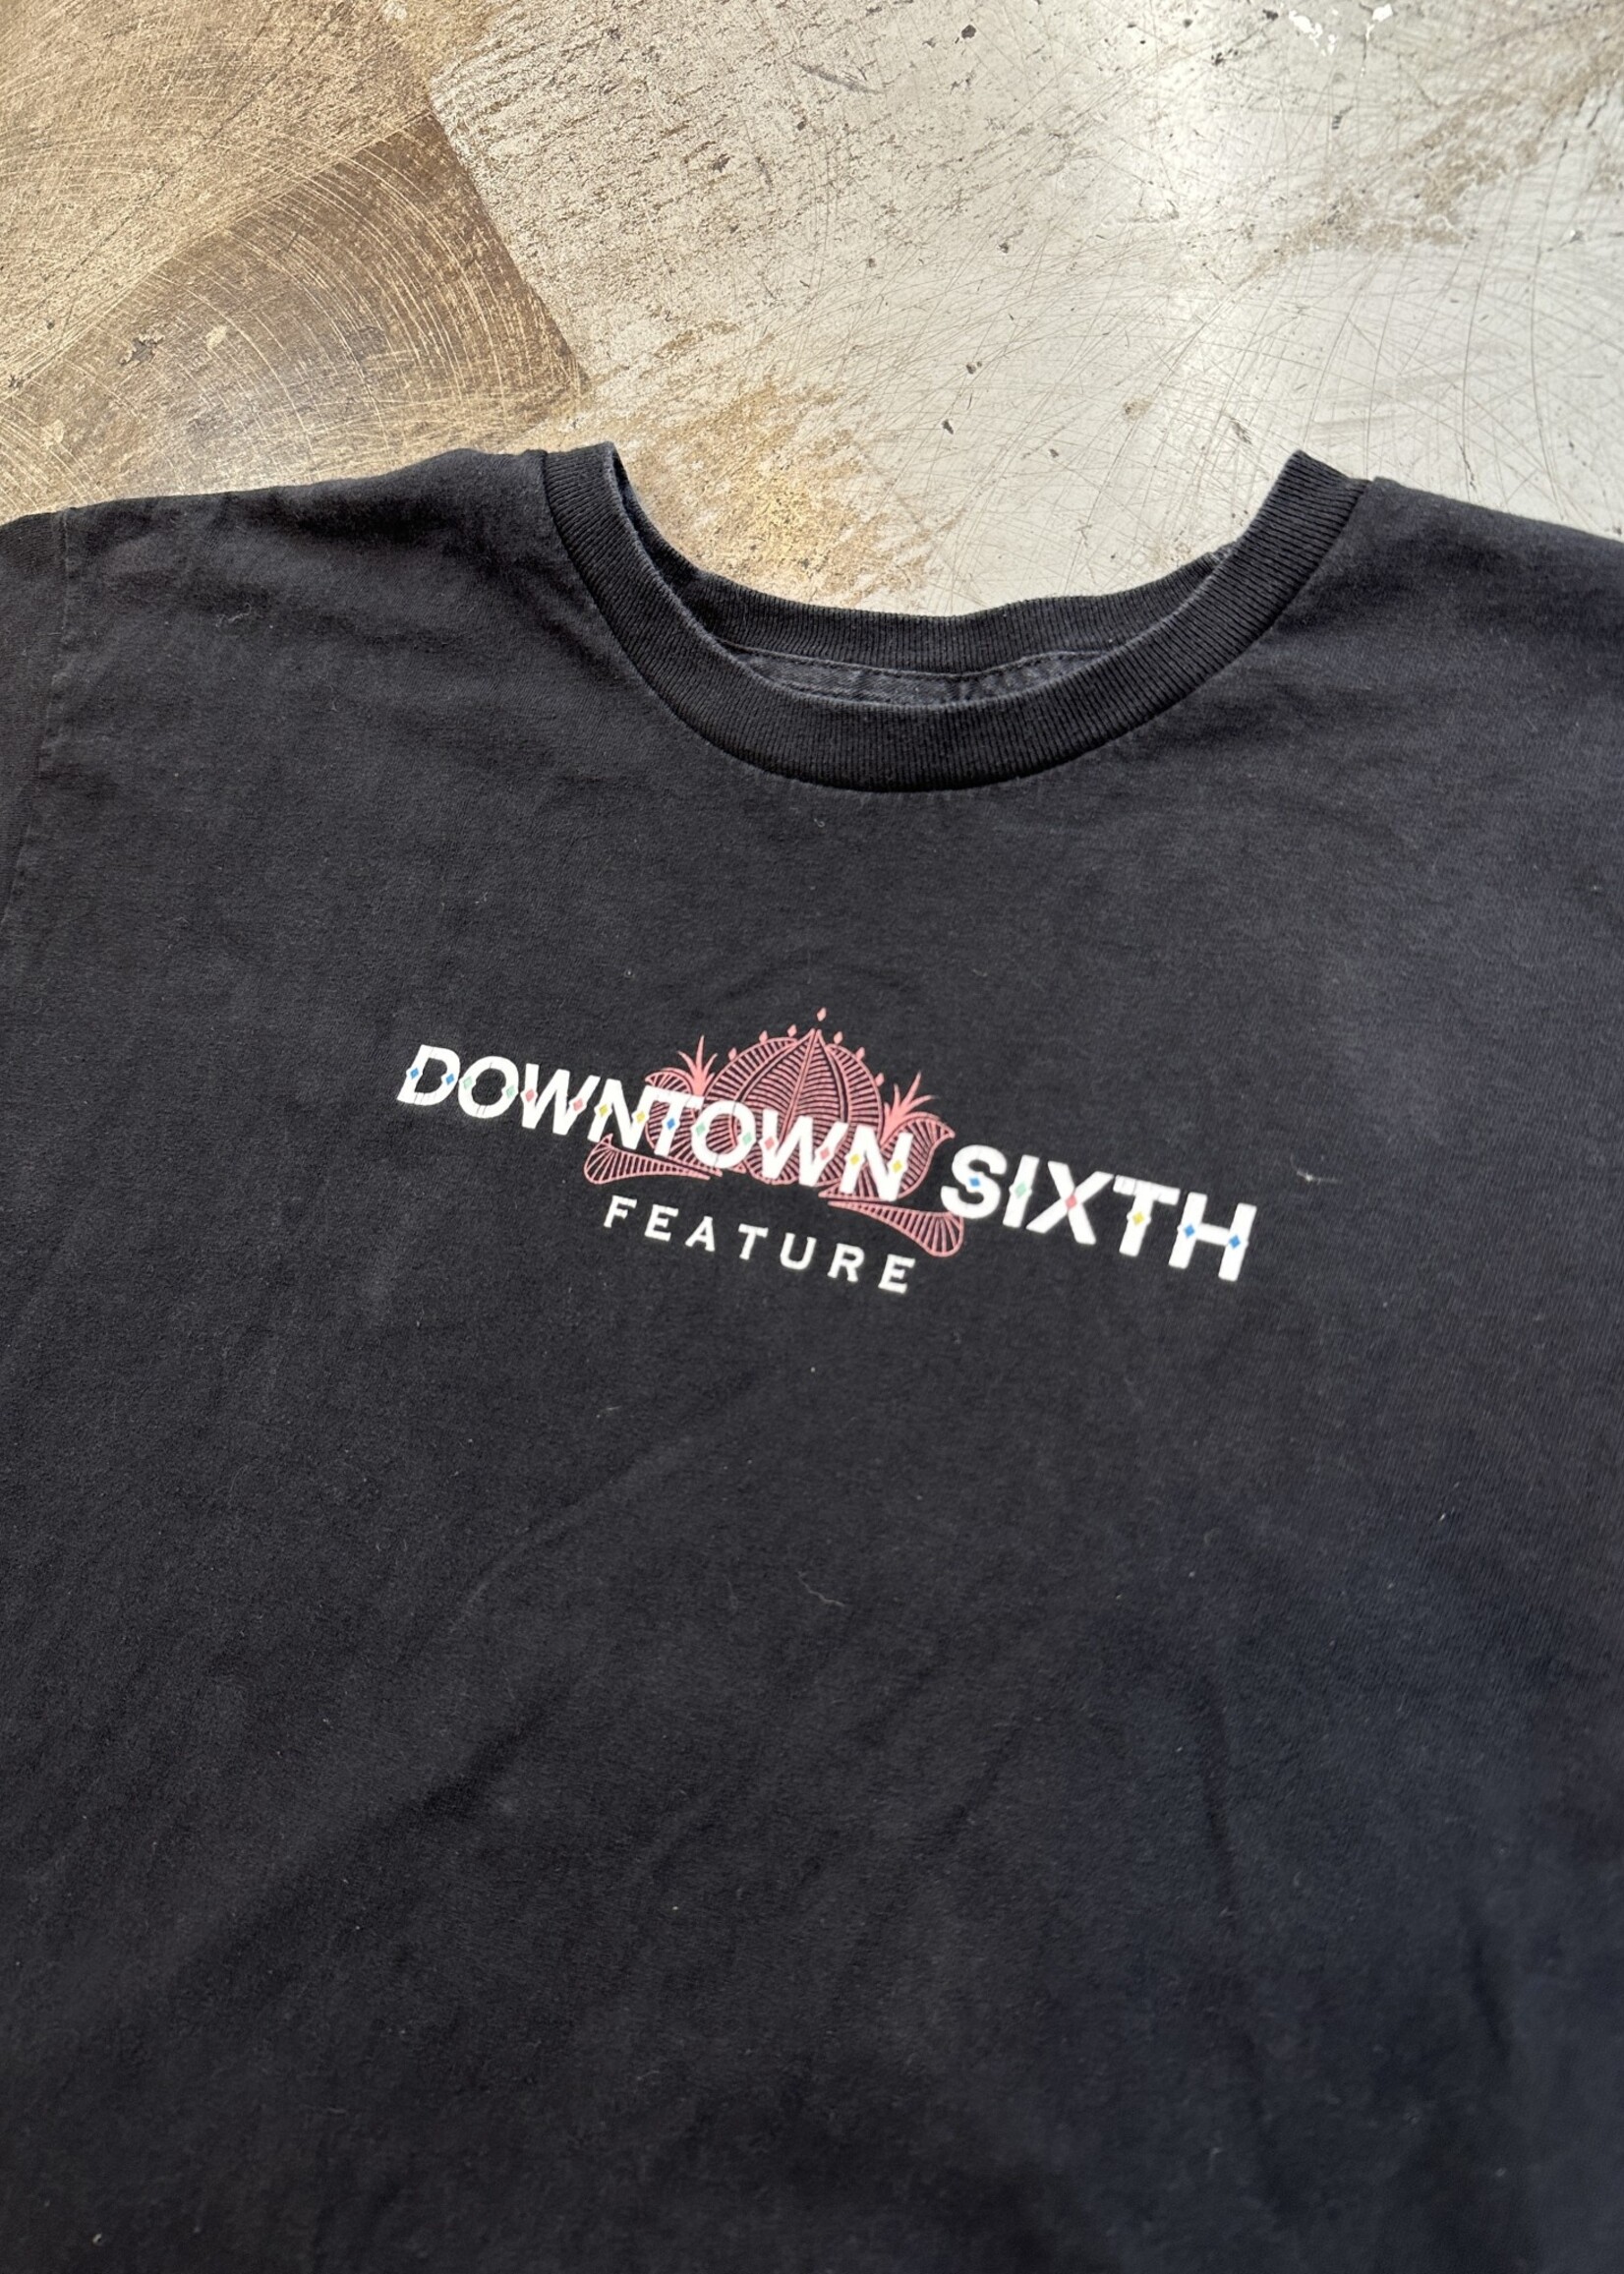 Downtown Sixth Feature Tee L